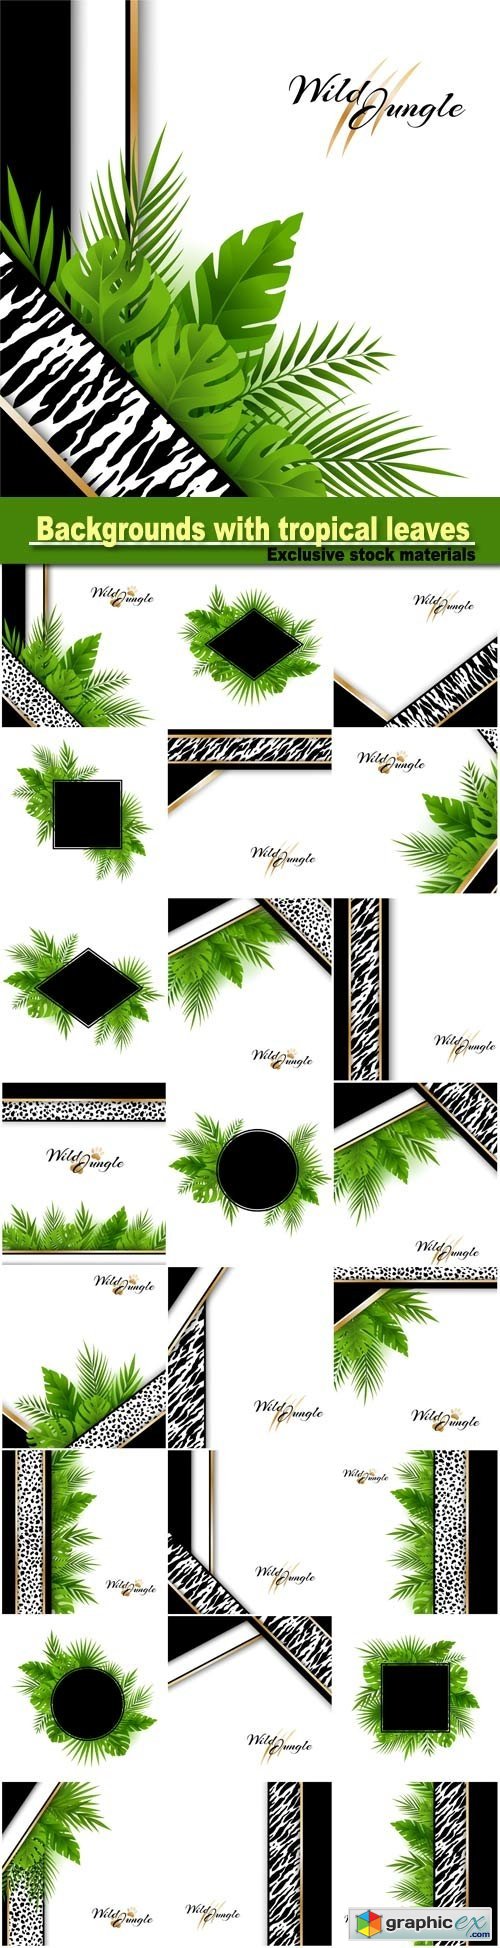 Abstract backgrounds with tropical leaves